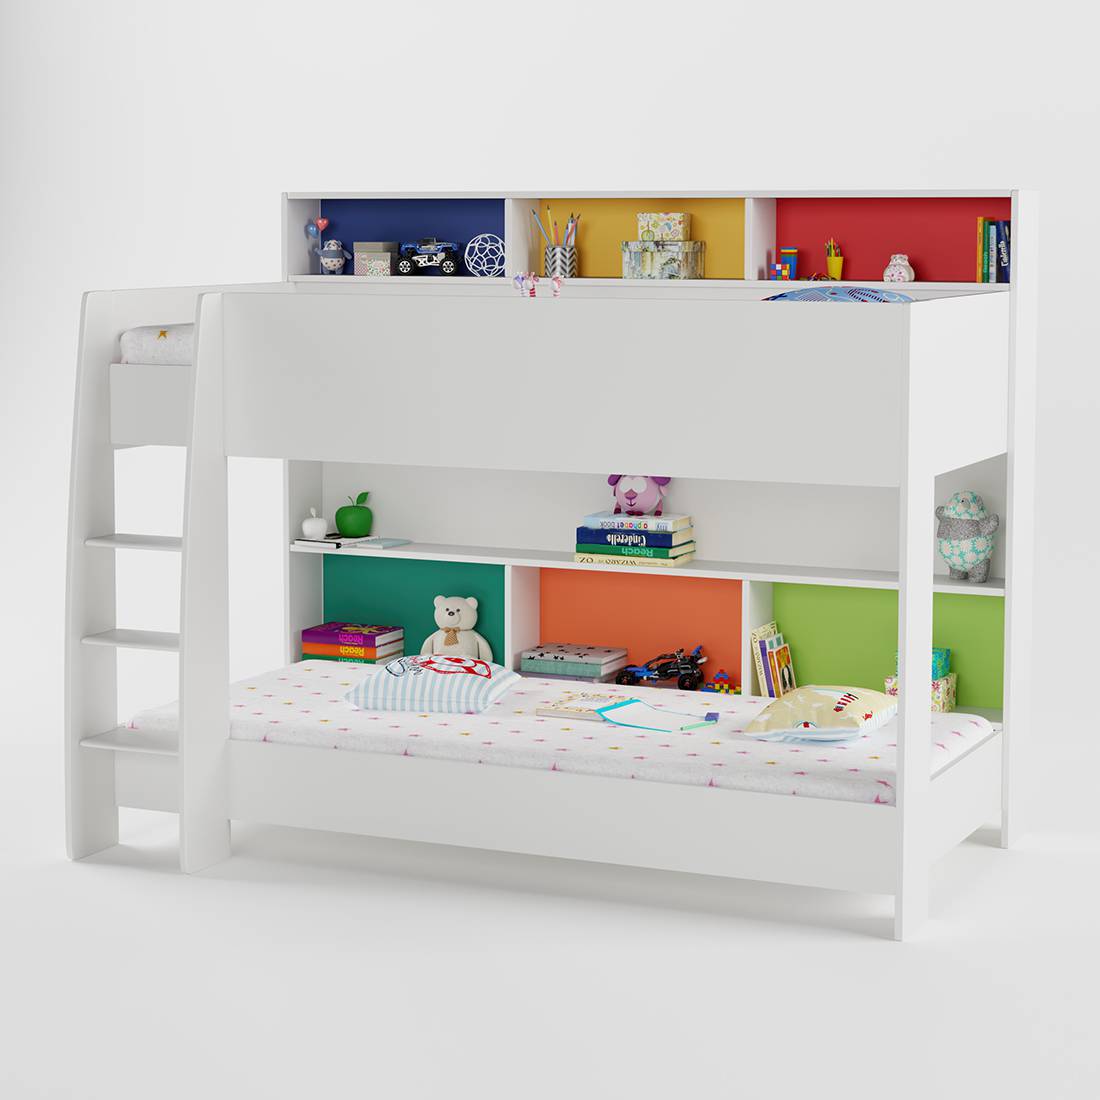 Bunk Bed Beds In India, Bunk Beds India